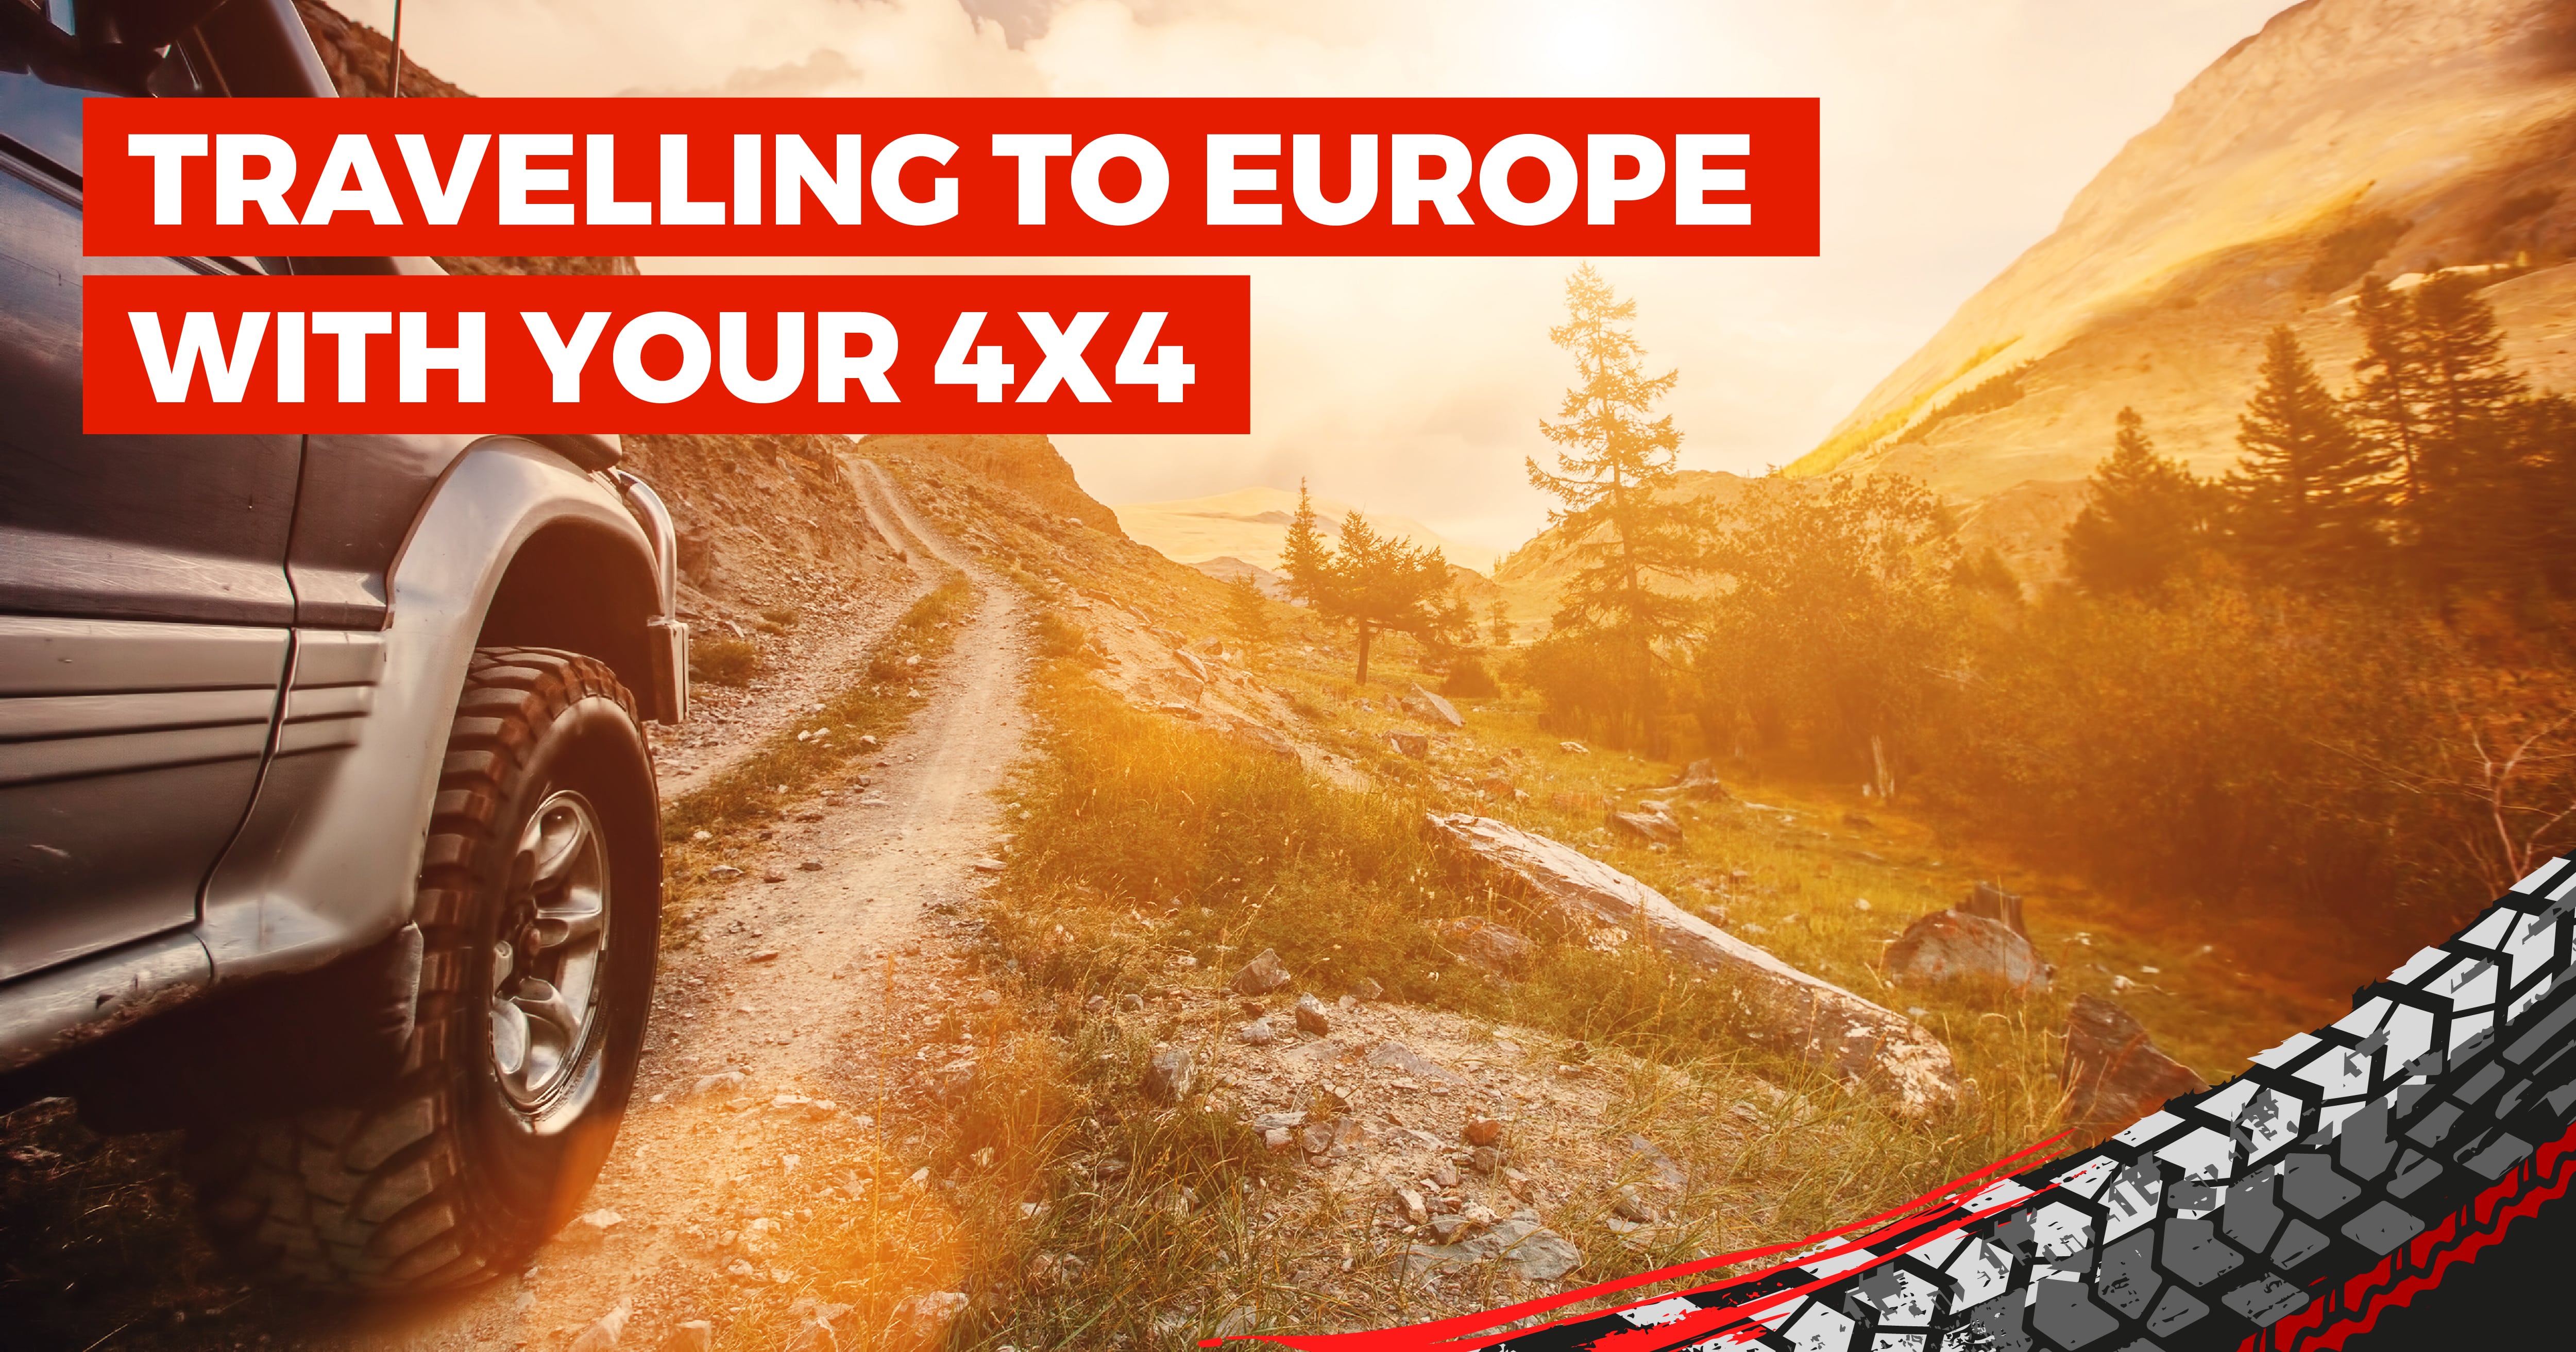 A Guide To Going to Europe With Your 4x4